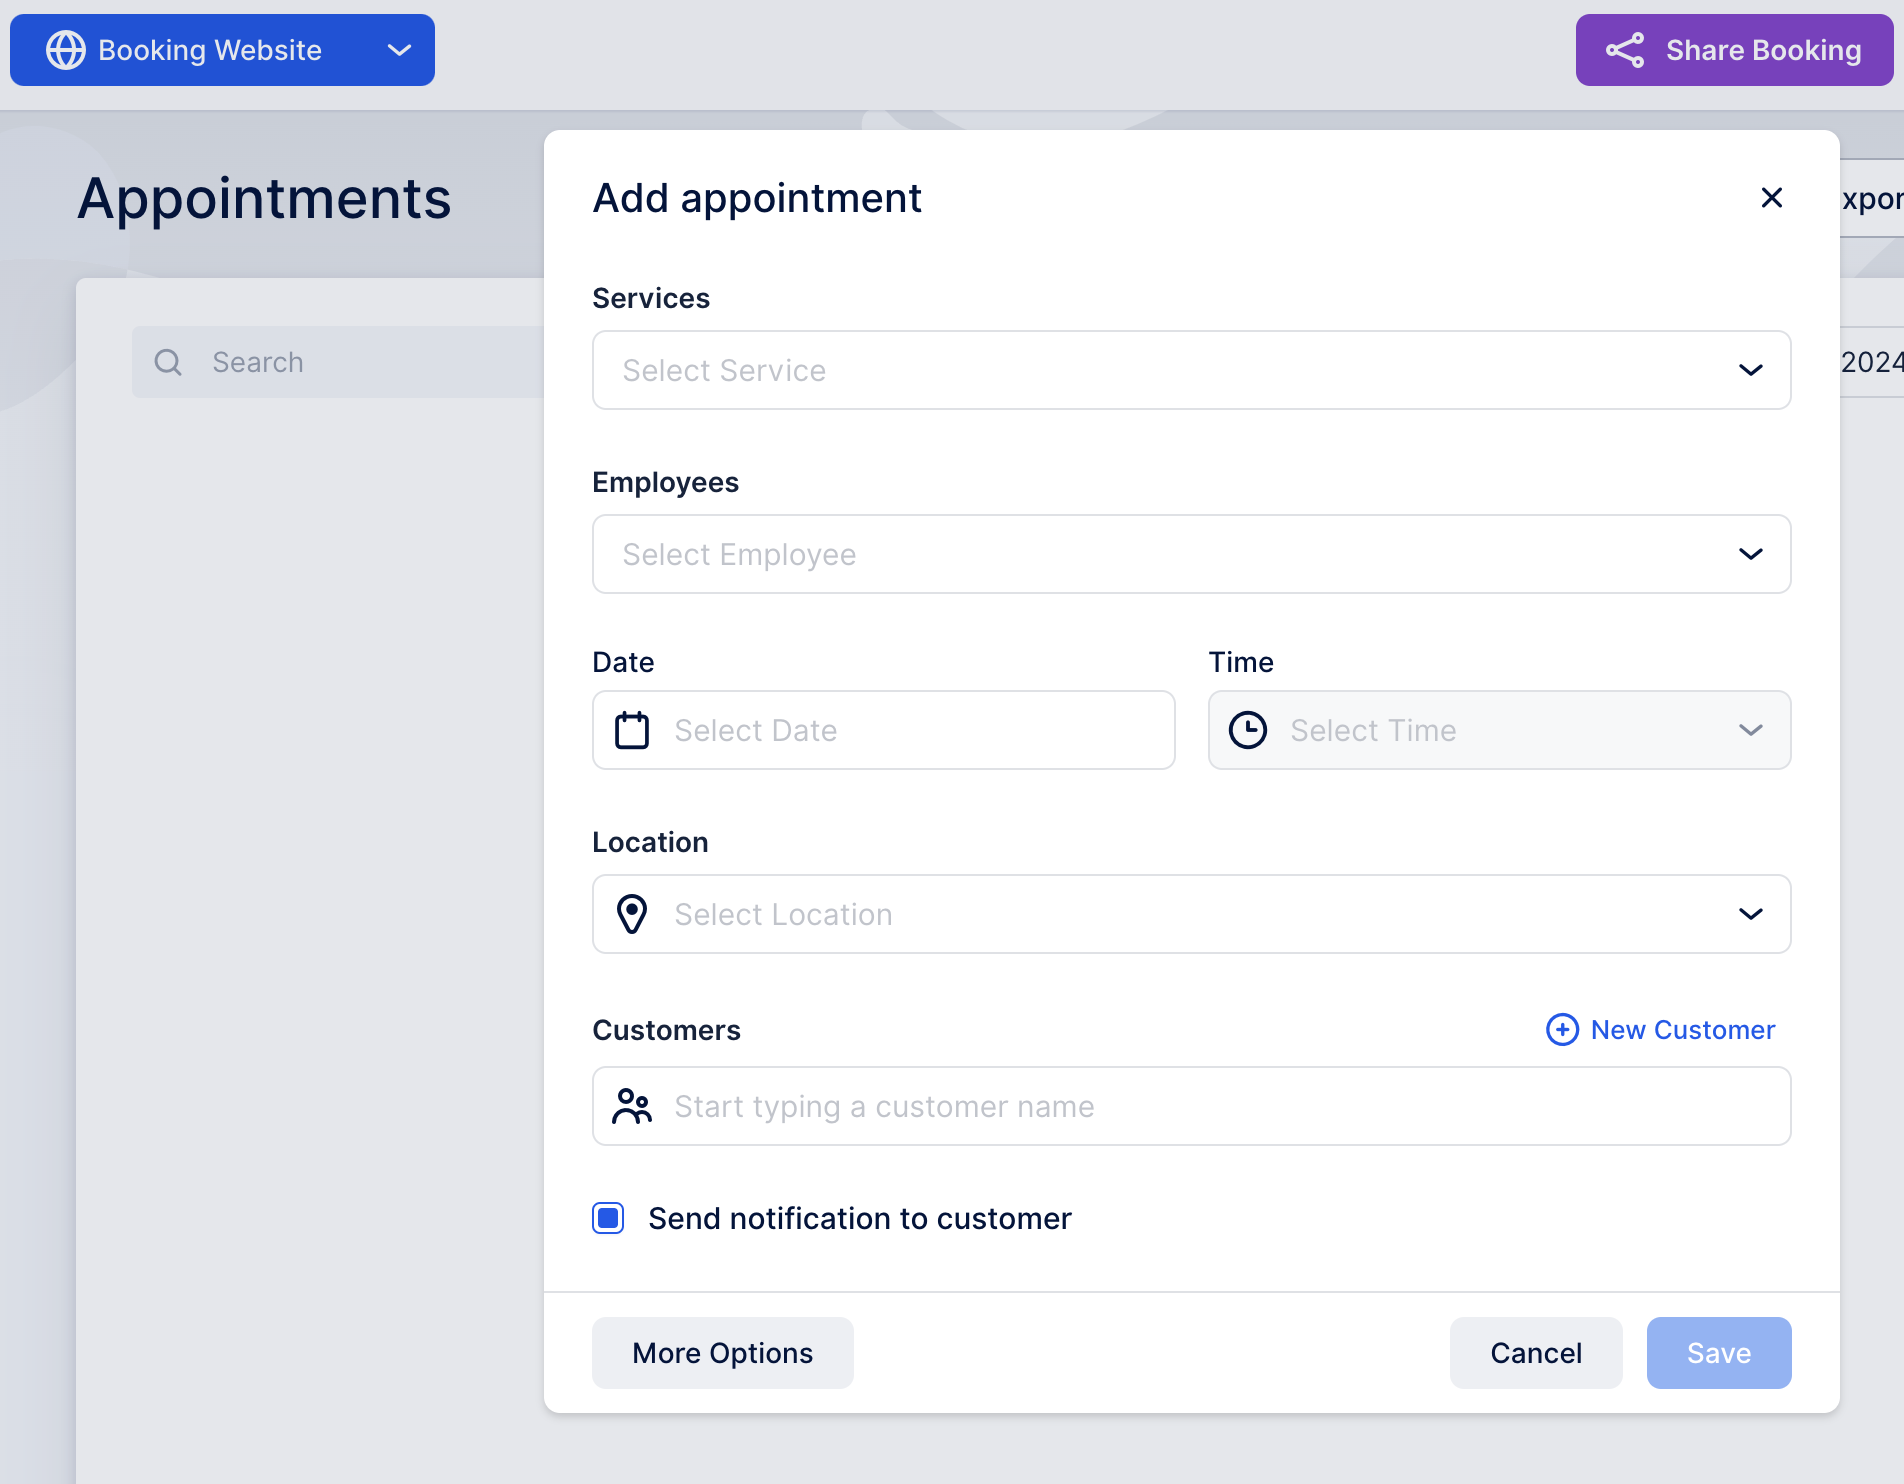 How to make an appointment with Trafft